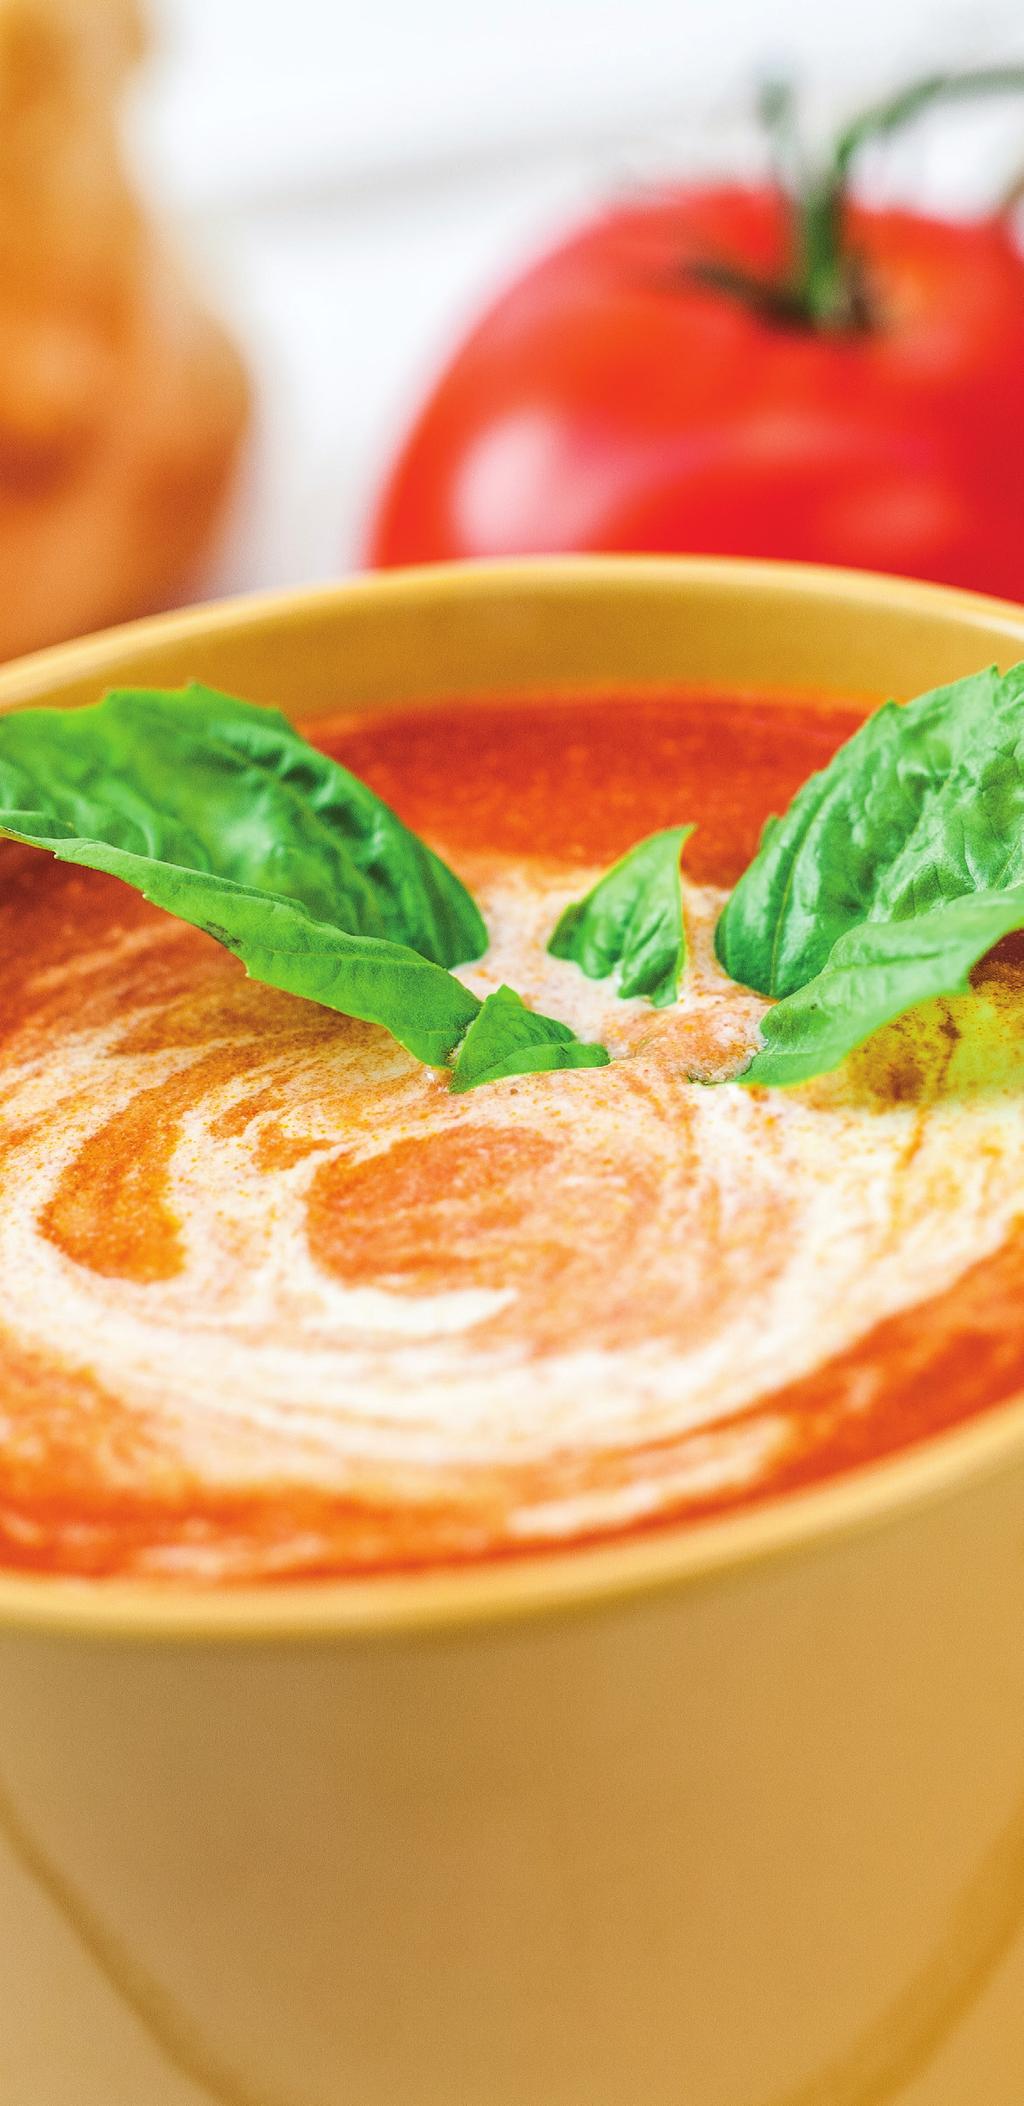 TOMATO-BASIL SOUP Accompany this simple, satisfying soup with crusty whole grain bread for a light meal.